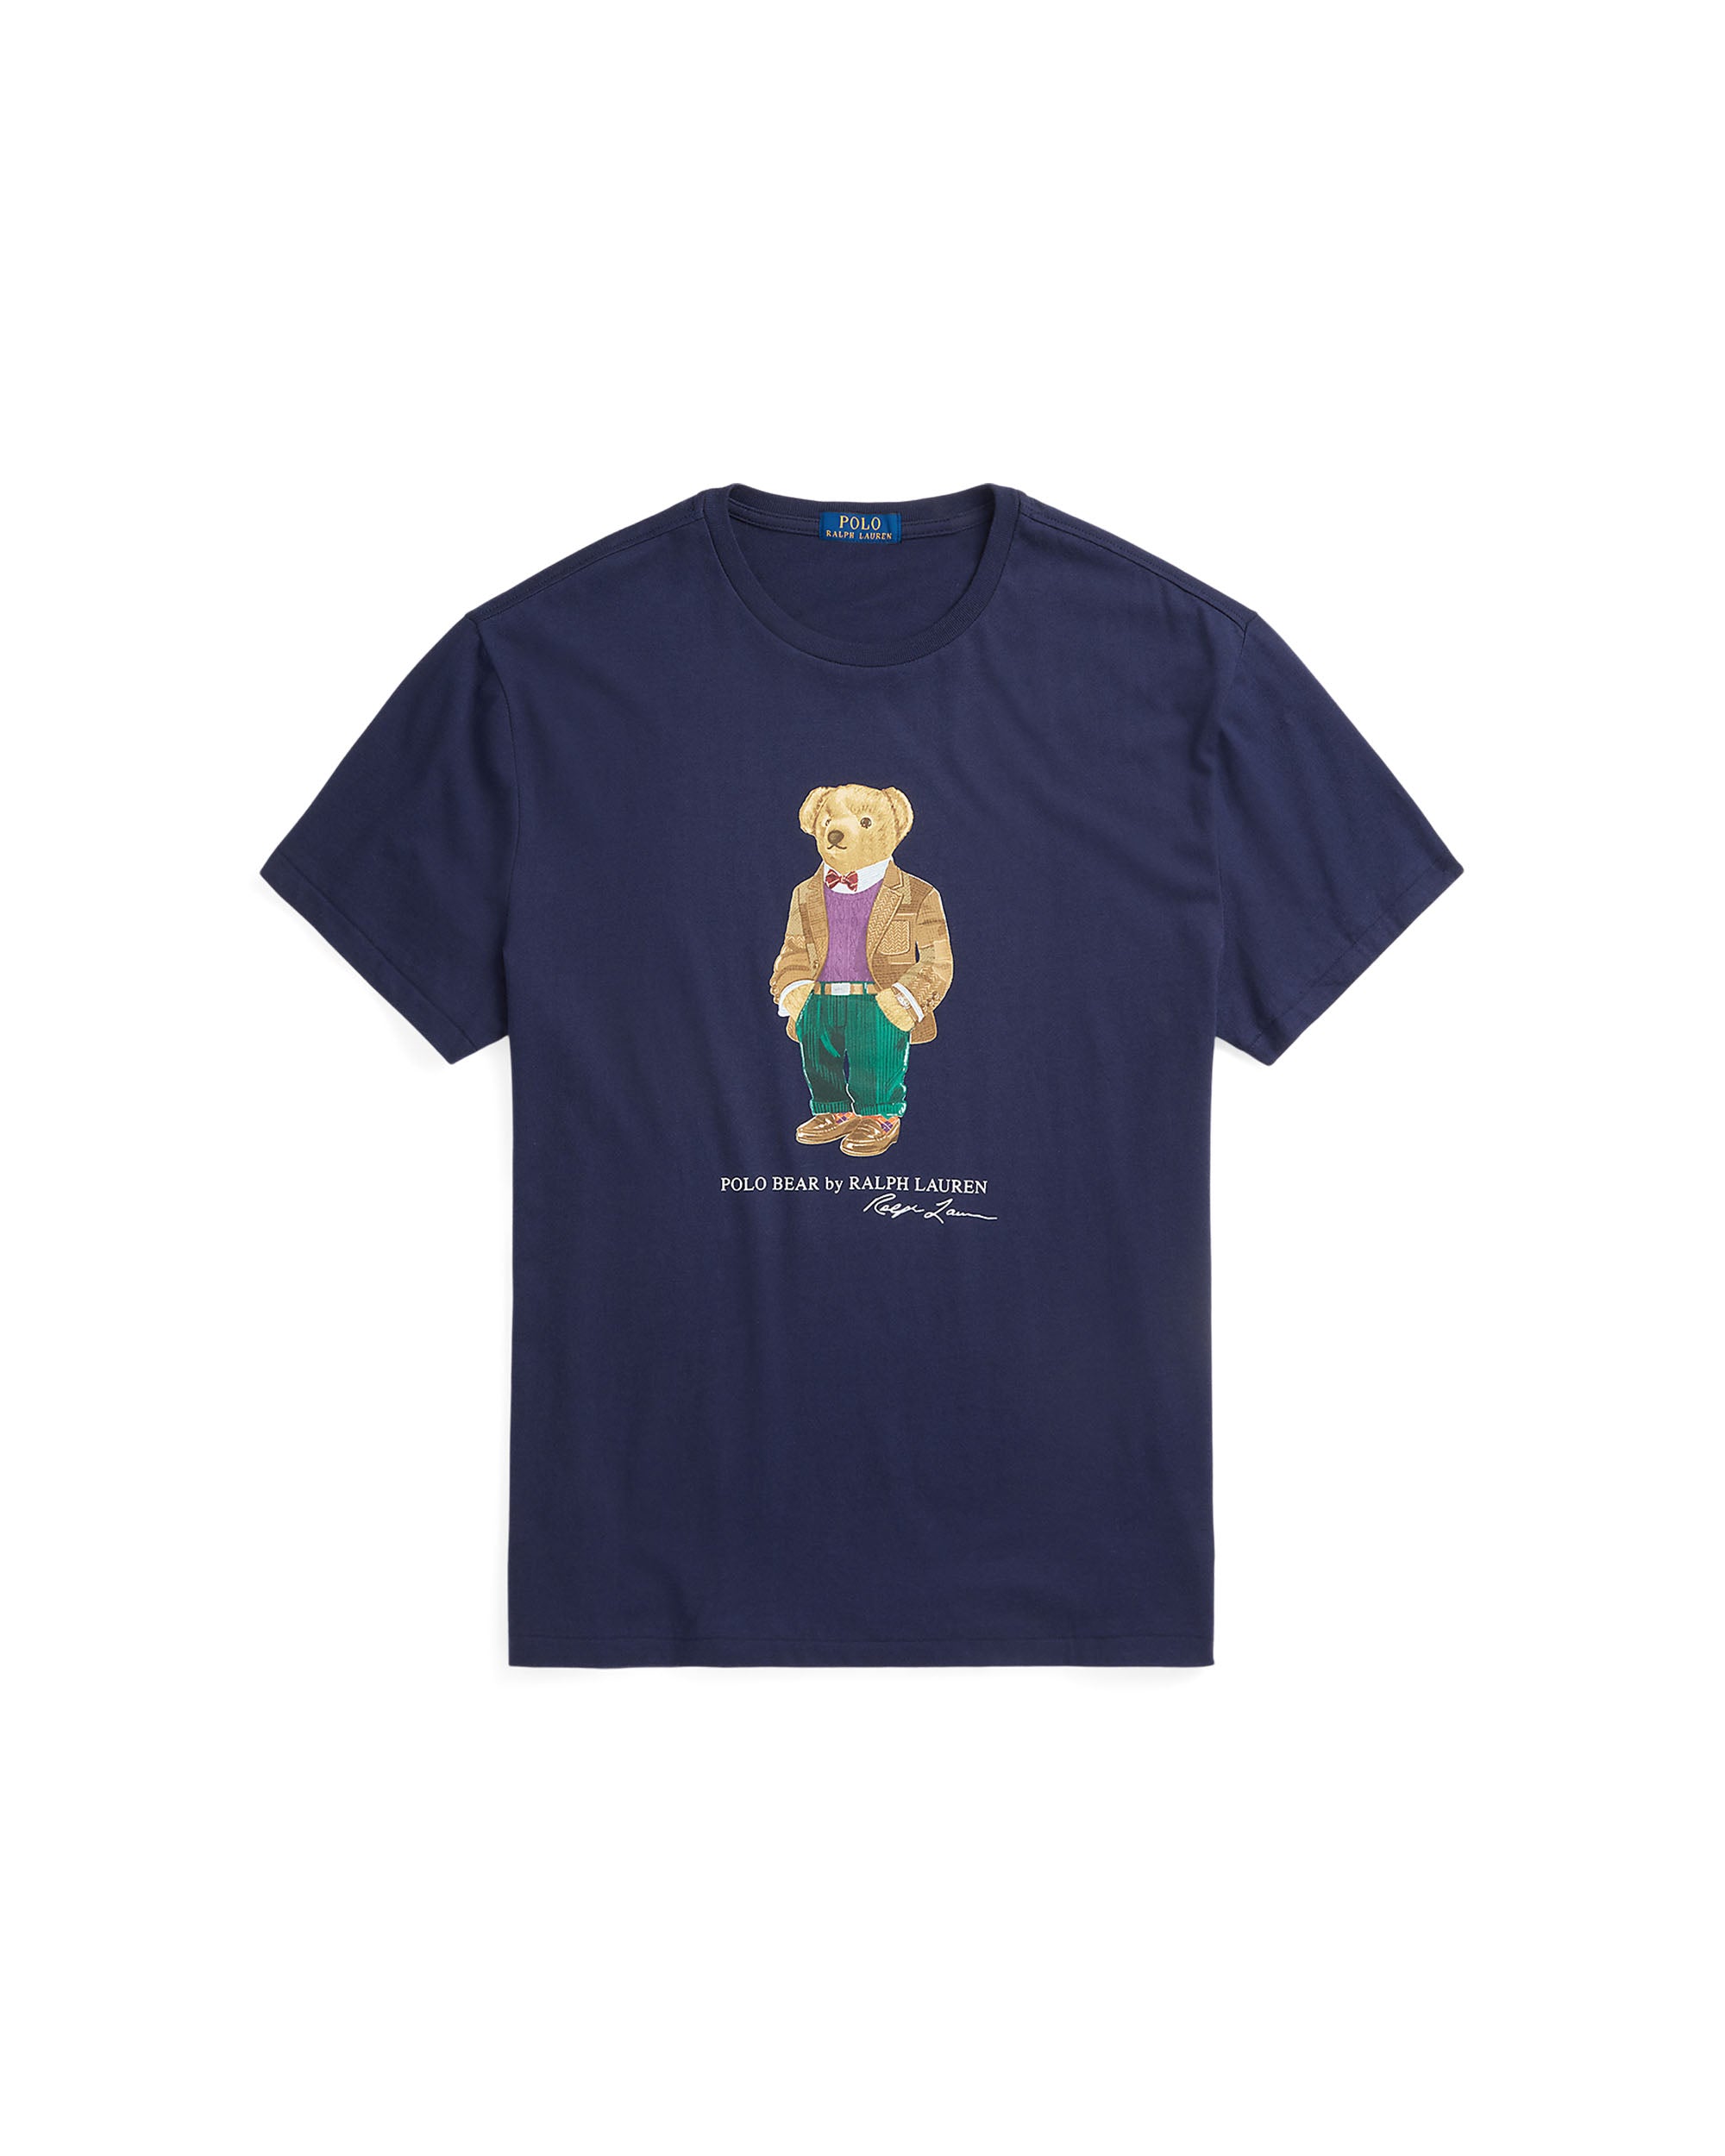 Classic Fit Polo Bear Jersey T-Shirt - Navy